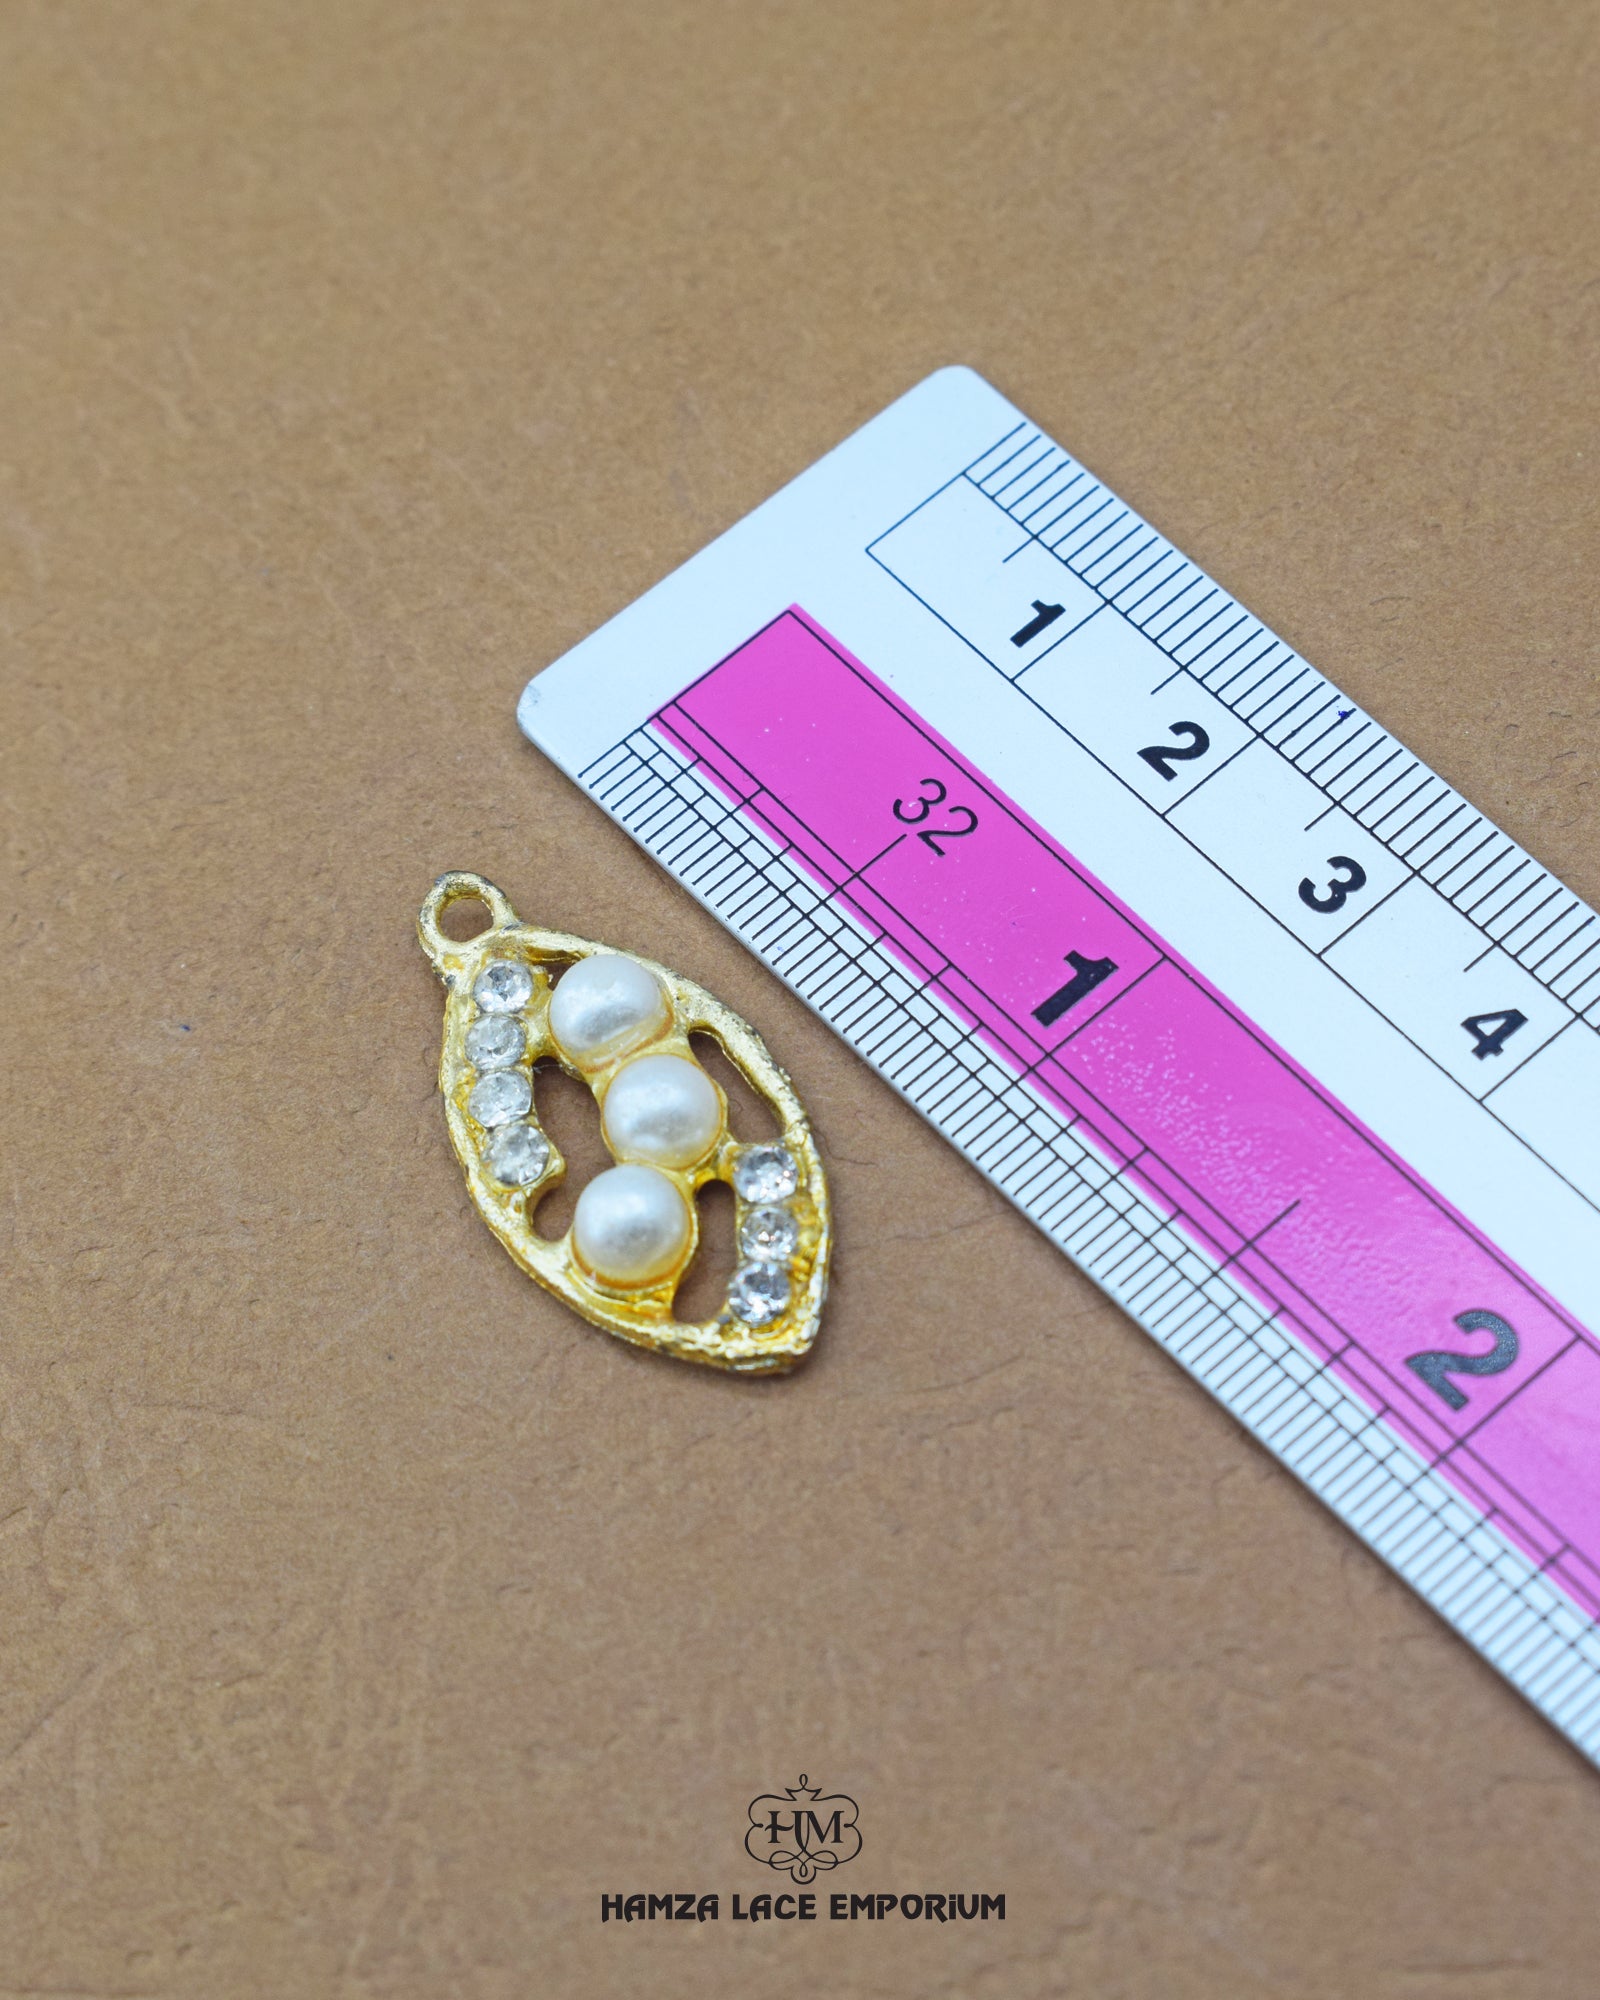 'Fancy Button 272FBC' with ruler for size reference in the product image.